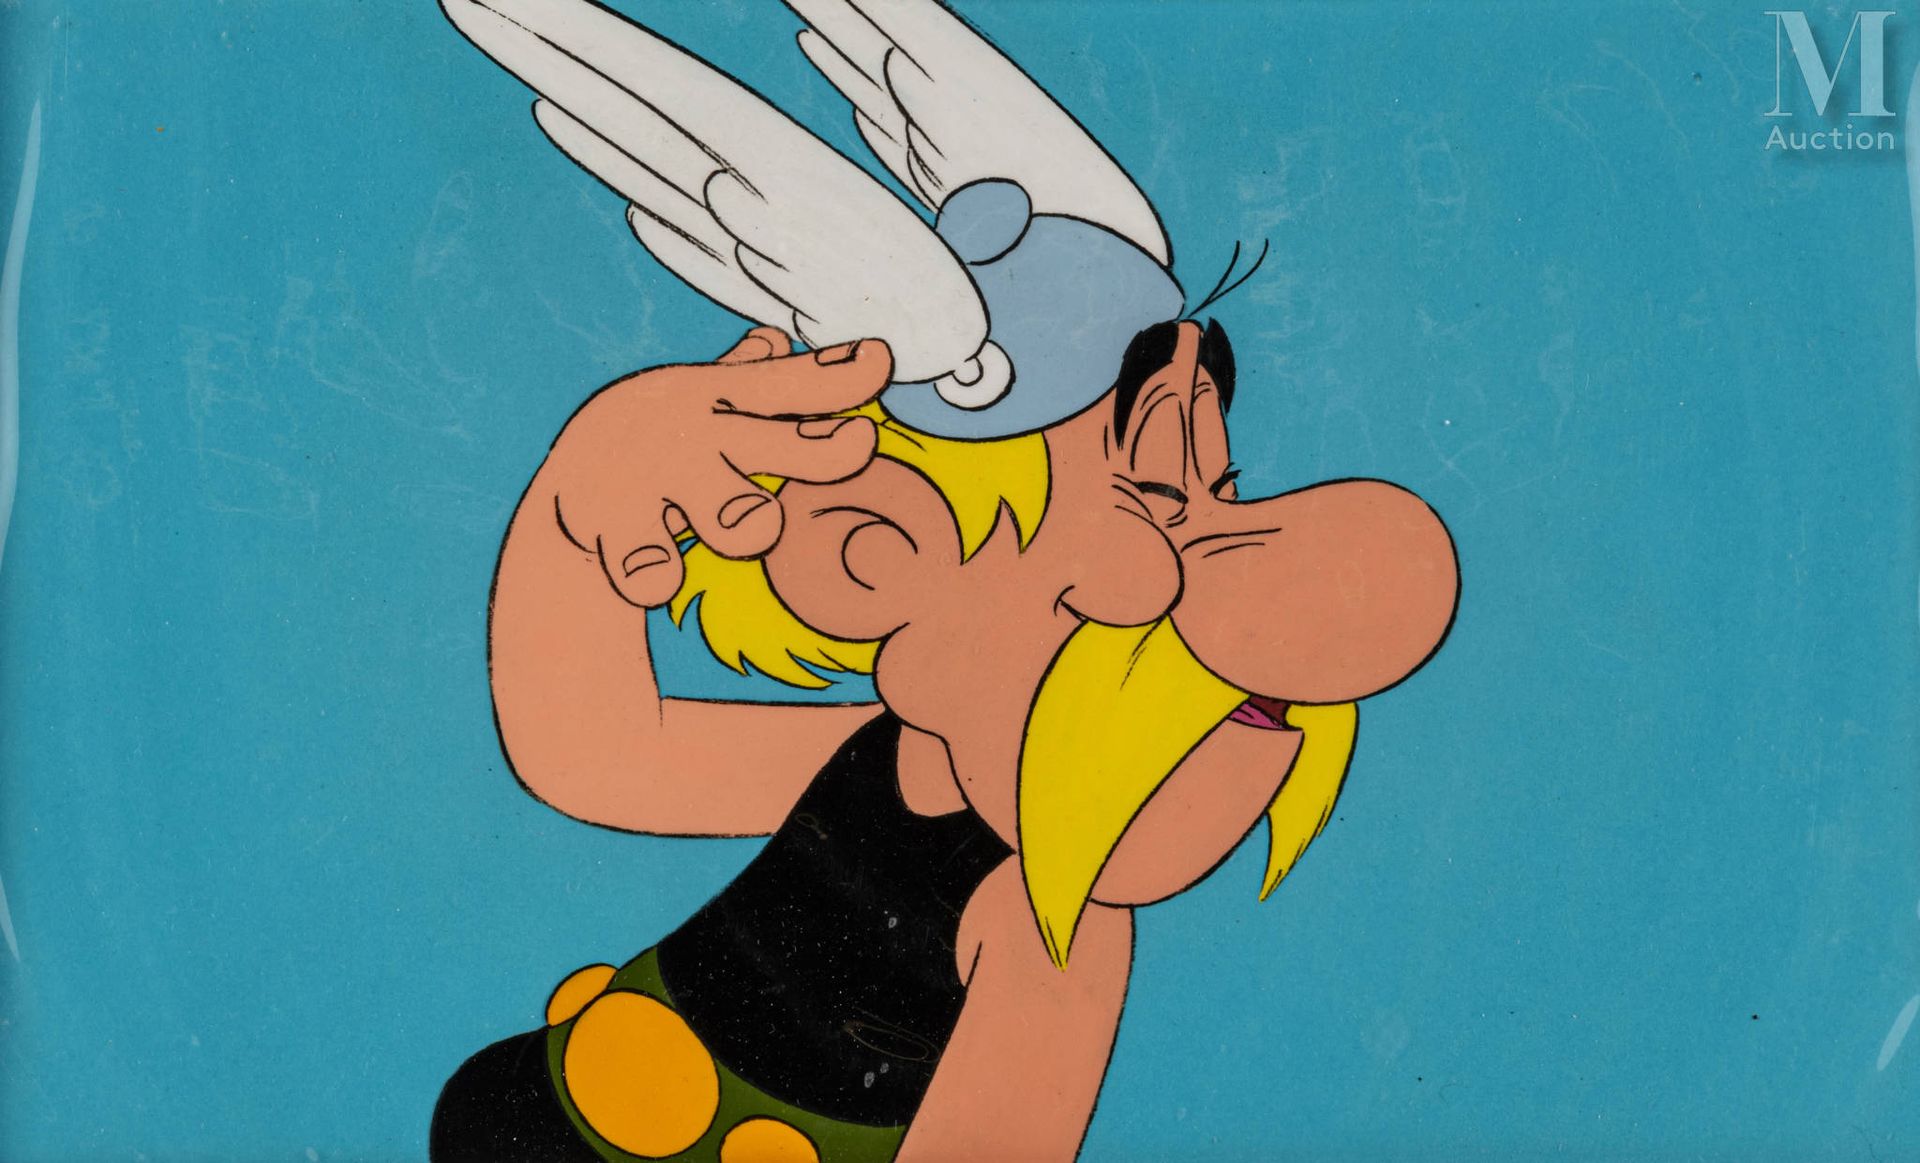 Null Original celluloid from a movie. We can see Asterix making a face.

Sequenc&hellip;